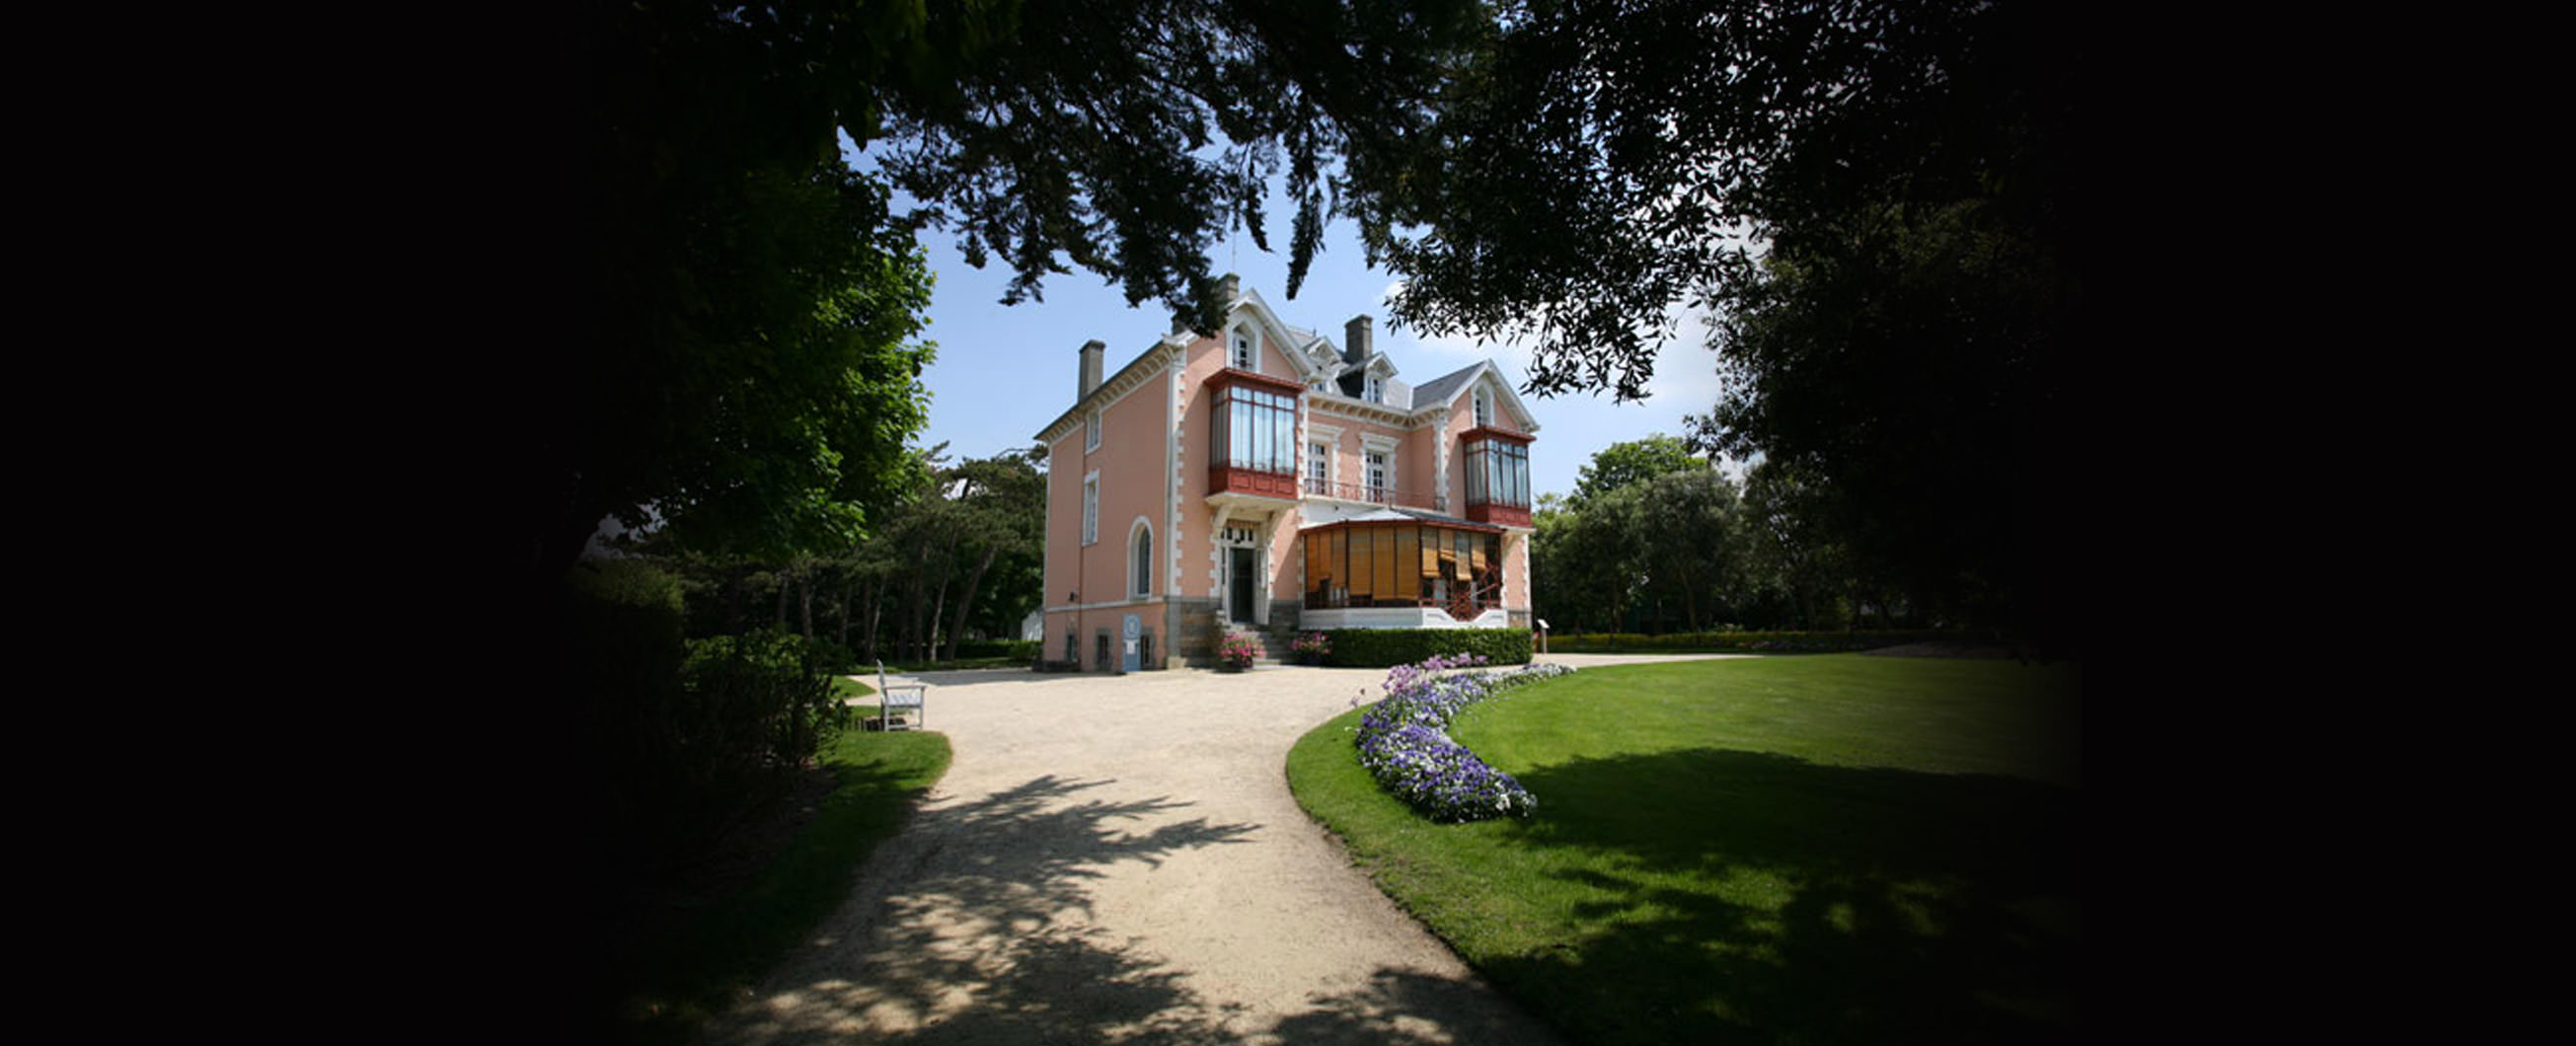 Yes, Mr. Dior. Childhood home of Christian Dior located in Granville, France near the town of Normandy.